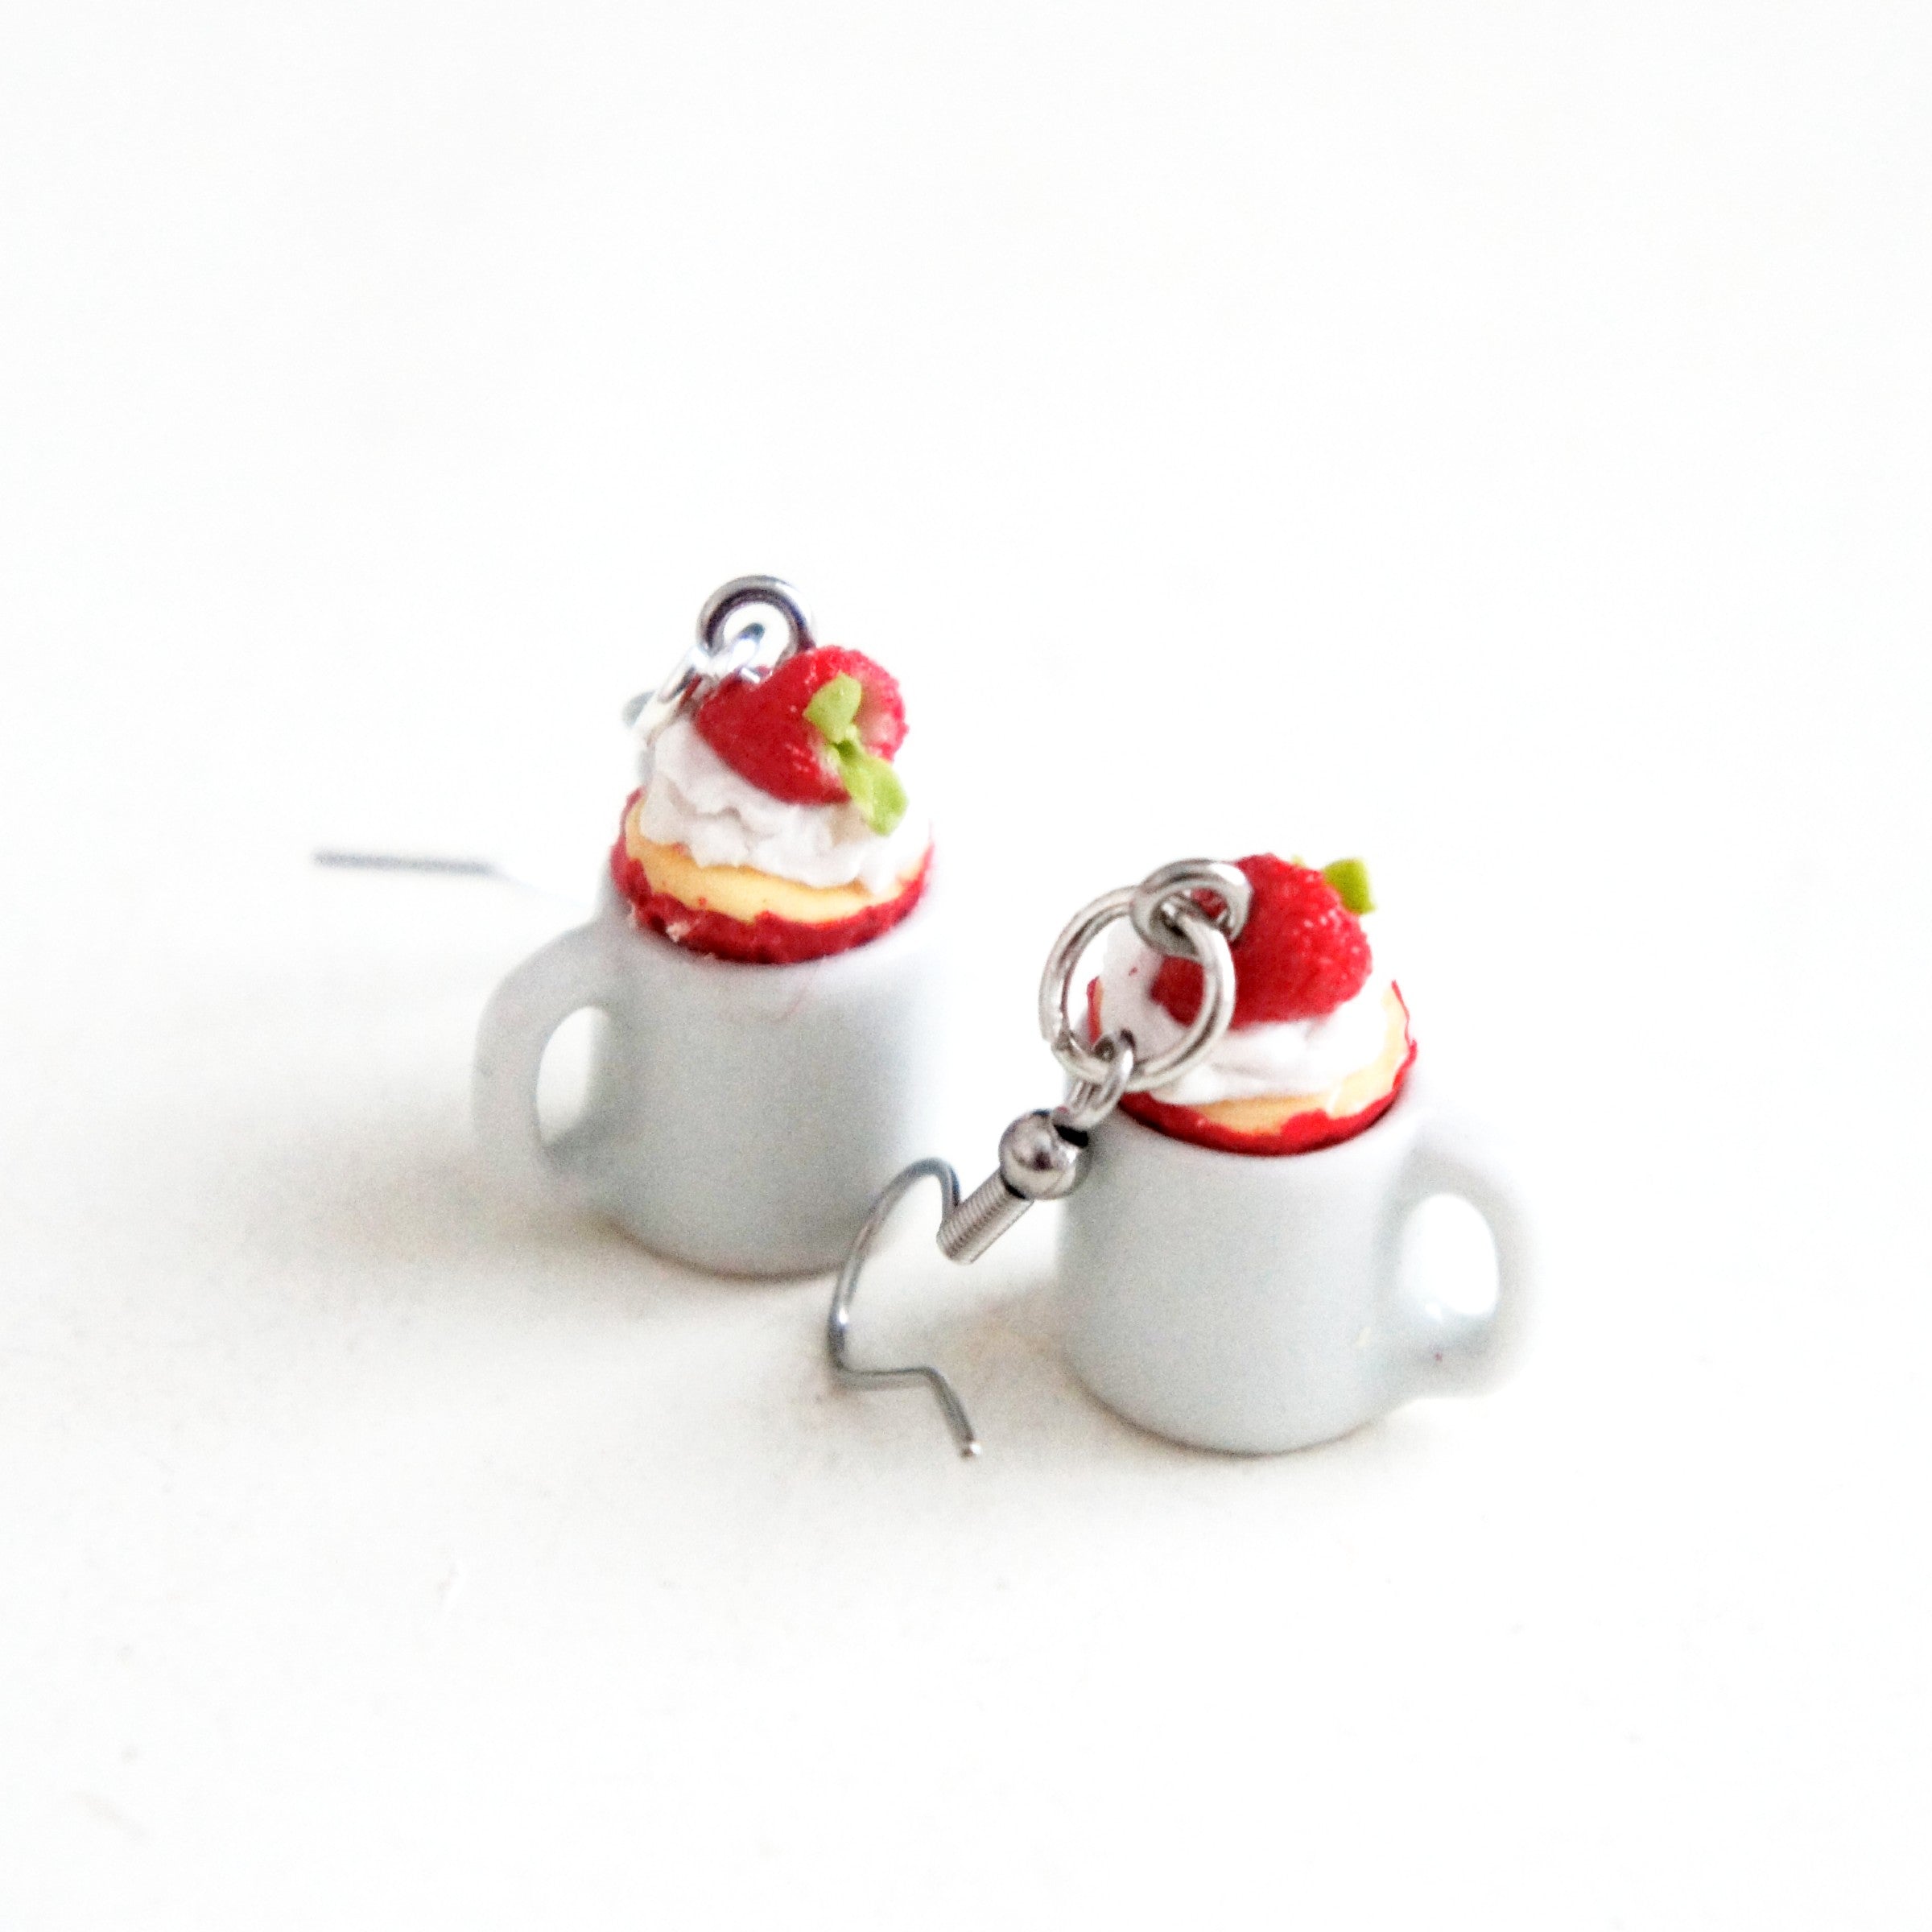 Strawberry Shortcake Cups Earrings - Jillicious charms and accessories